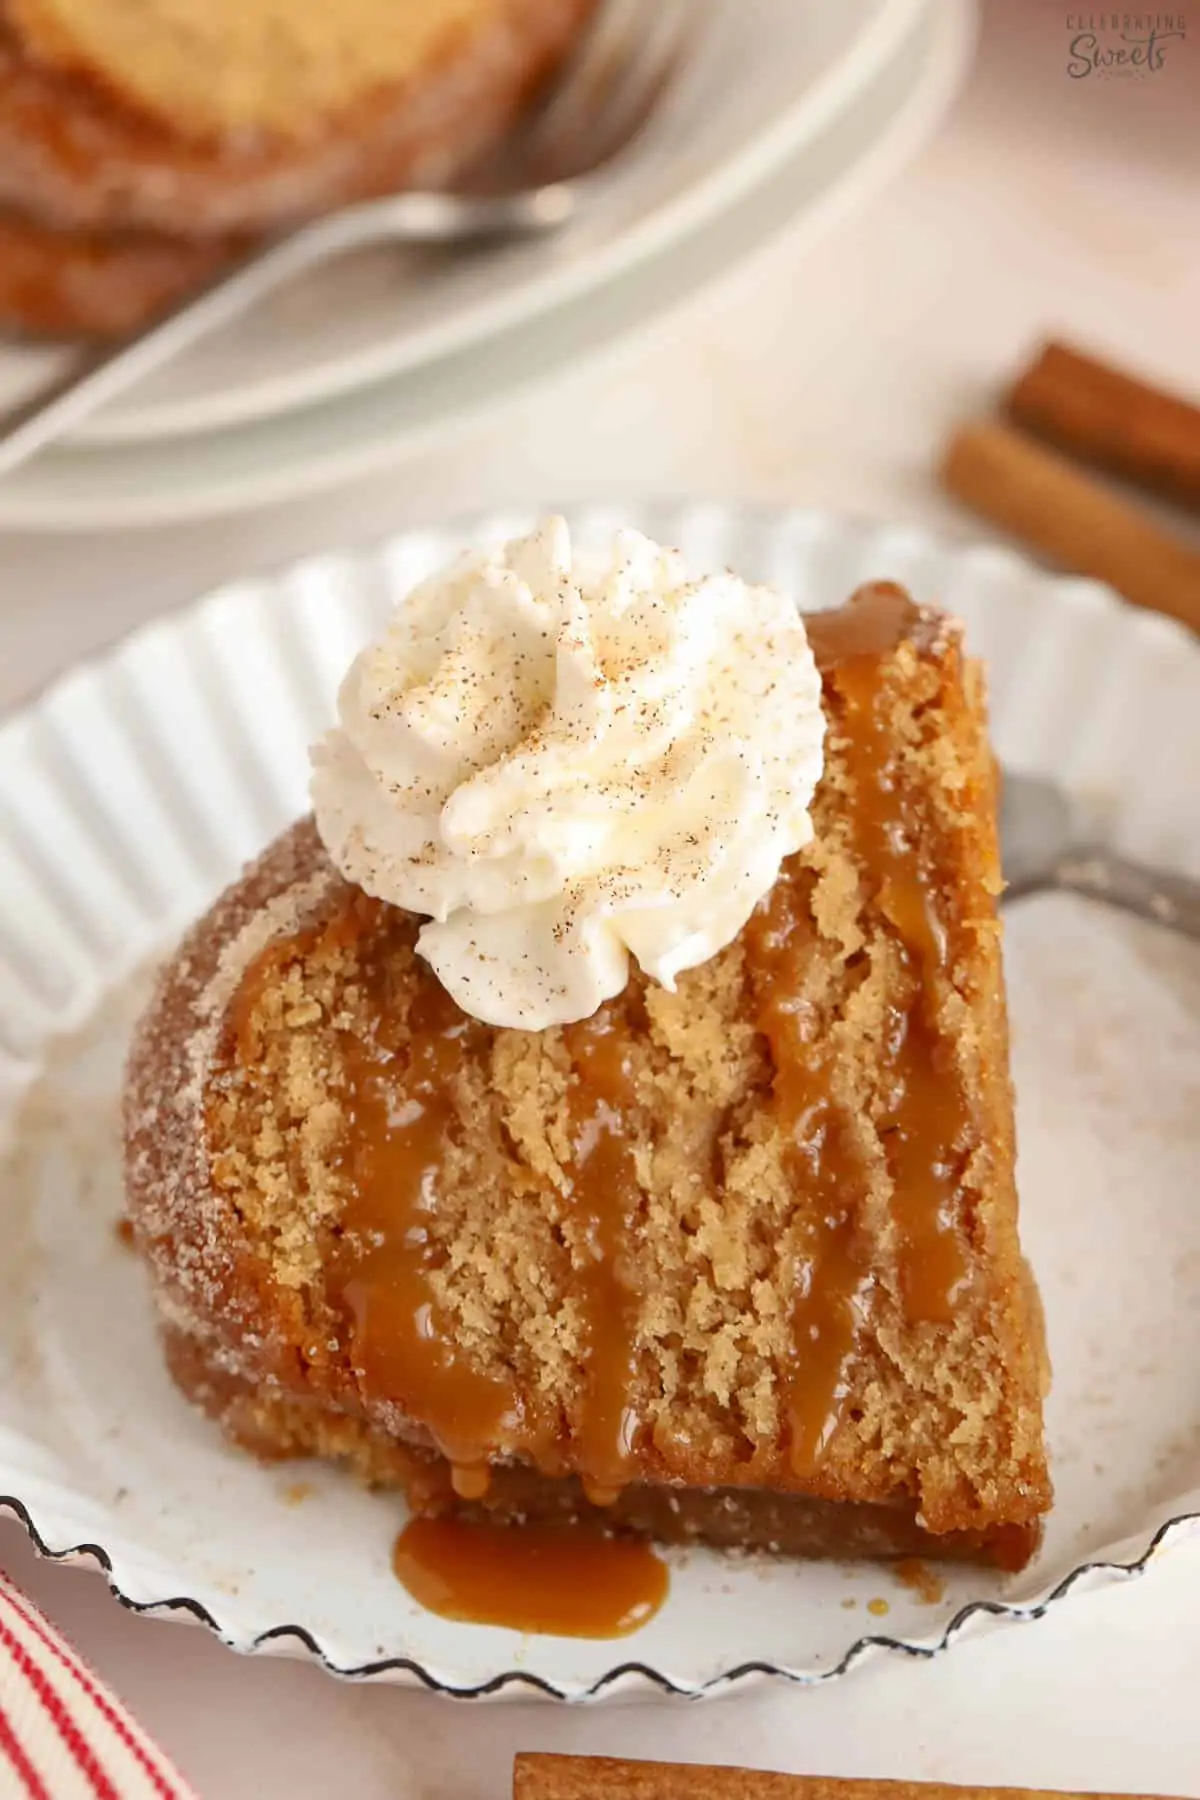 Slice of apple cider donut cake drizzled with caramel sauce and topped with whipped cream.